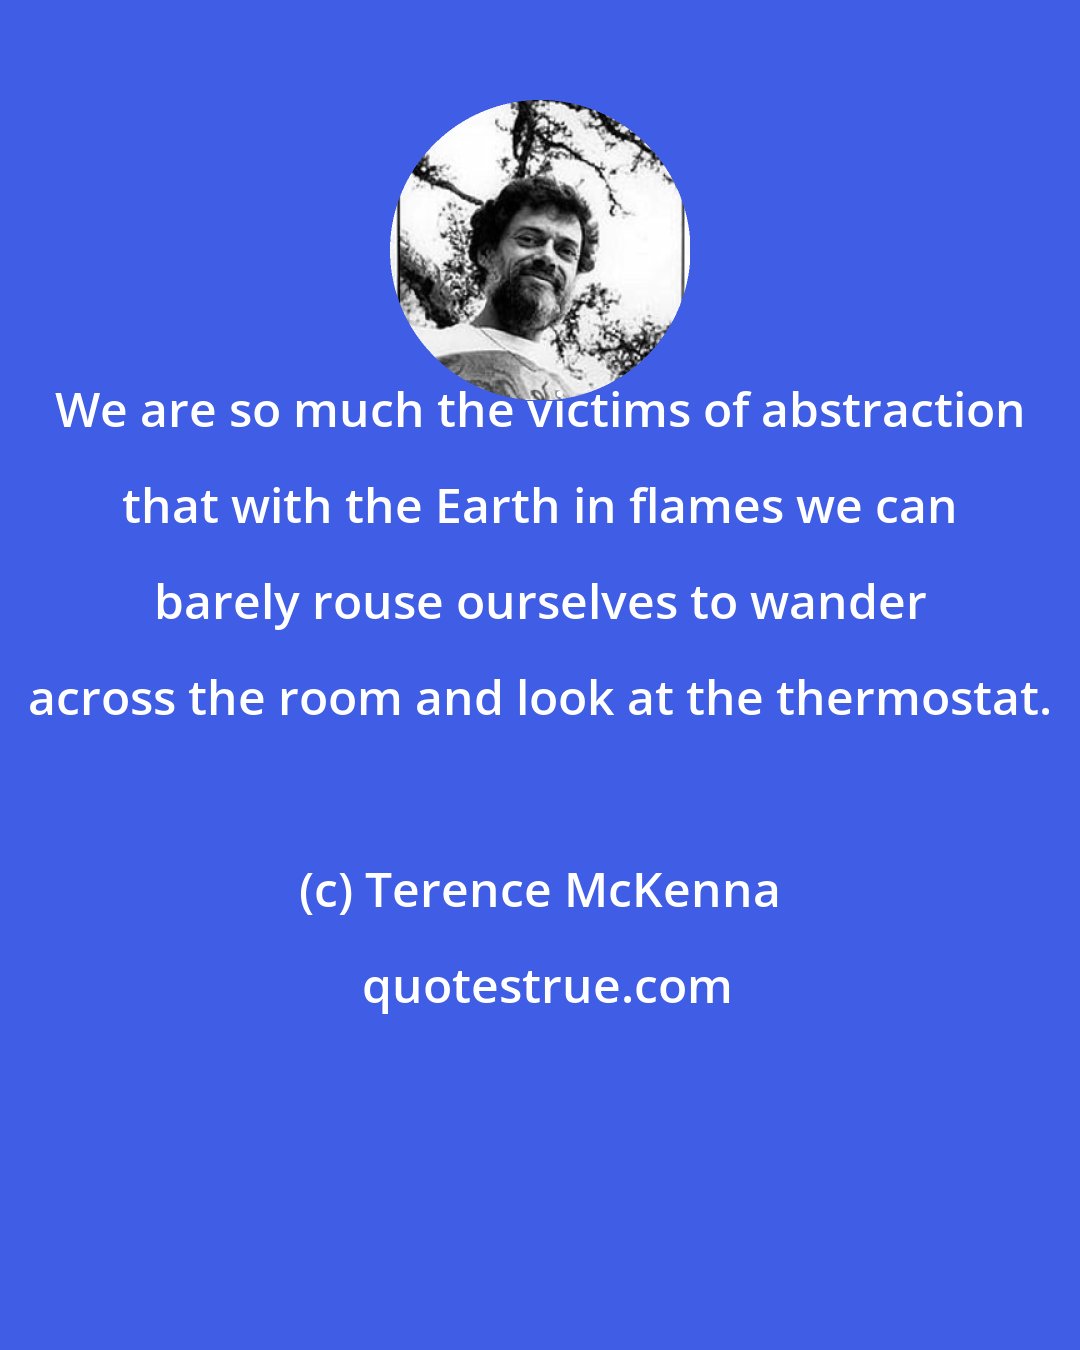 Terence McKenna: We are so much the victims of abstraction that with the Earth in flames we can barely rouse ourselves to wander across the room and look at the thermostat.